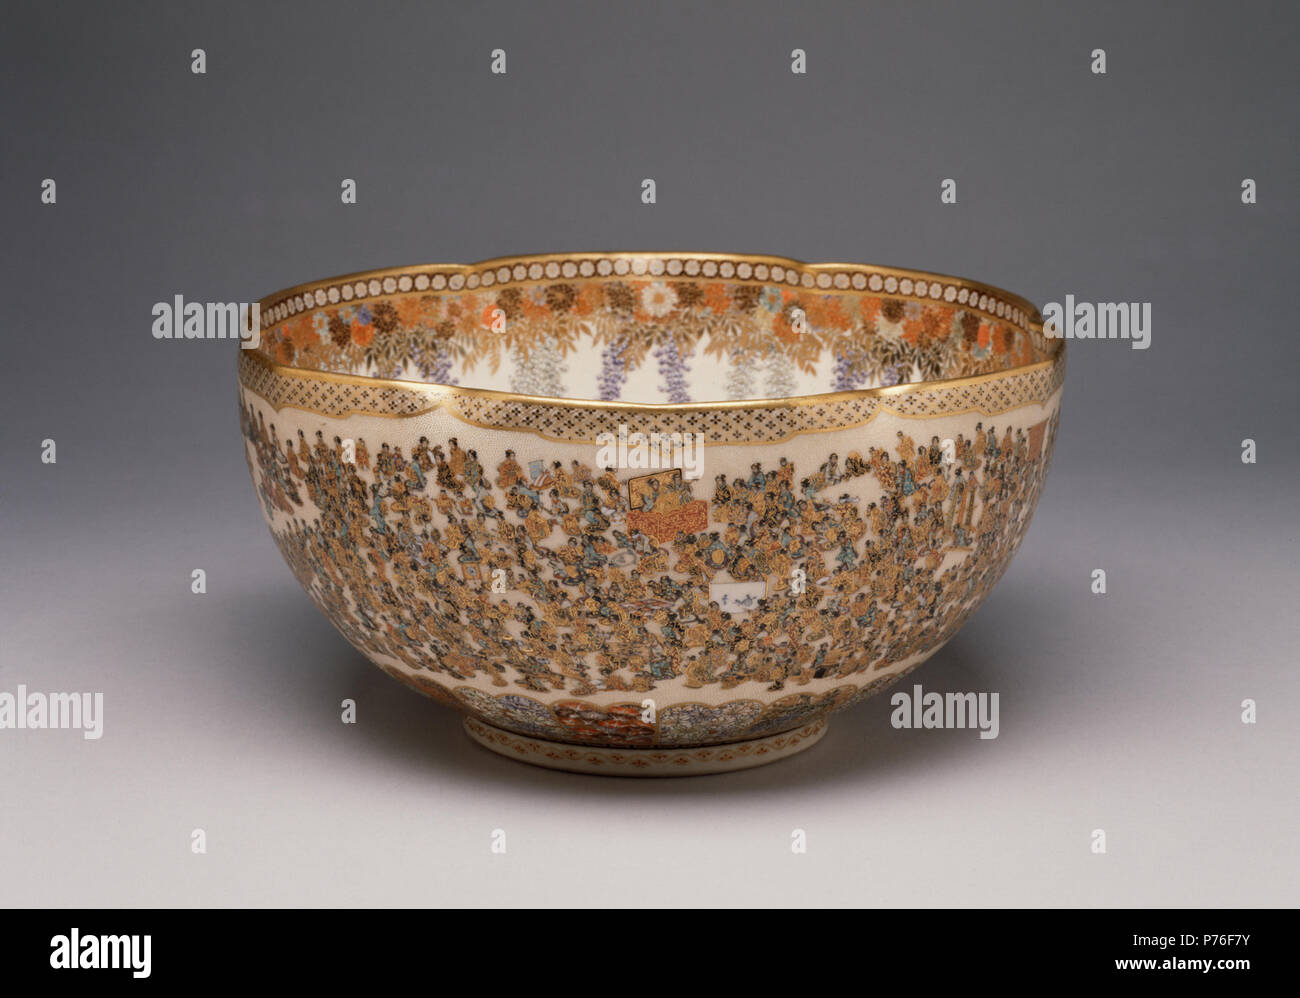 Yabu Meizan (Japanese, 1853-1934). 'Bowl with a Multitude of Women,' ca. 1904. white earthenware with overglaze cloissonné enamels and gold. Walters Art Museum (49.2280): Acquired by Henry Walters, 1904. 230 Yabu Meizan - Bowl with a Multitude of Women - Walters 492280 - Profile Stock Photo